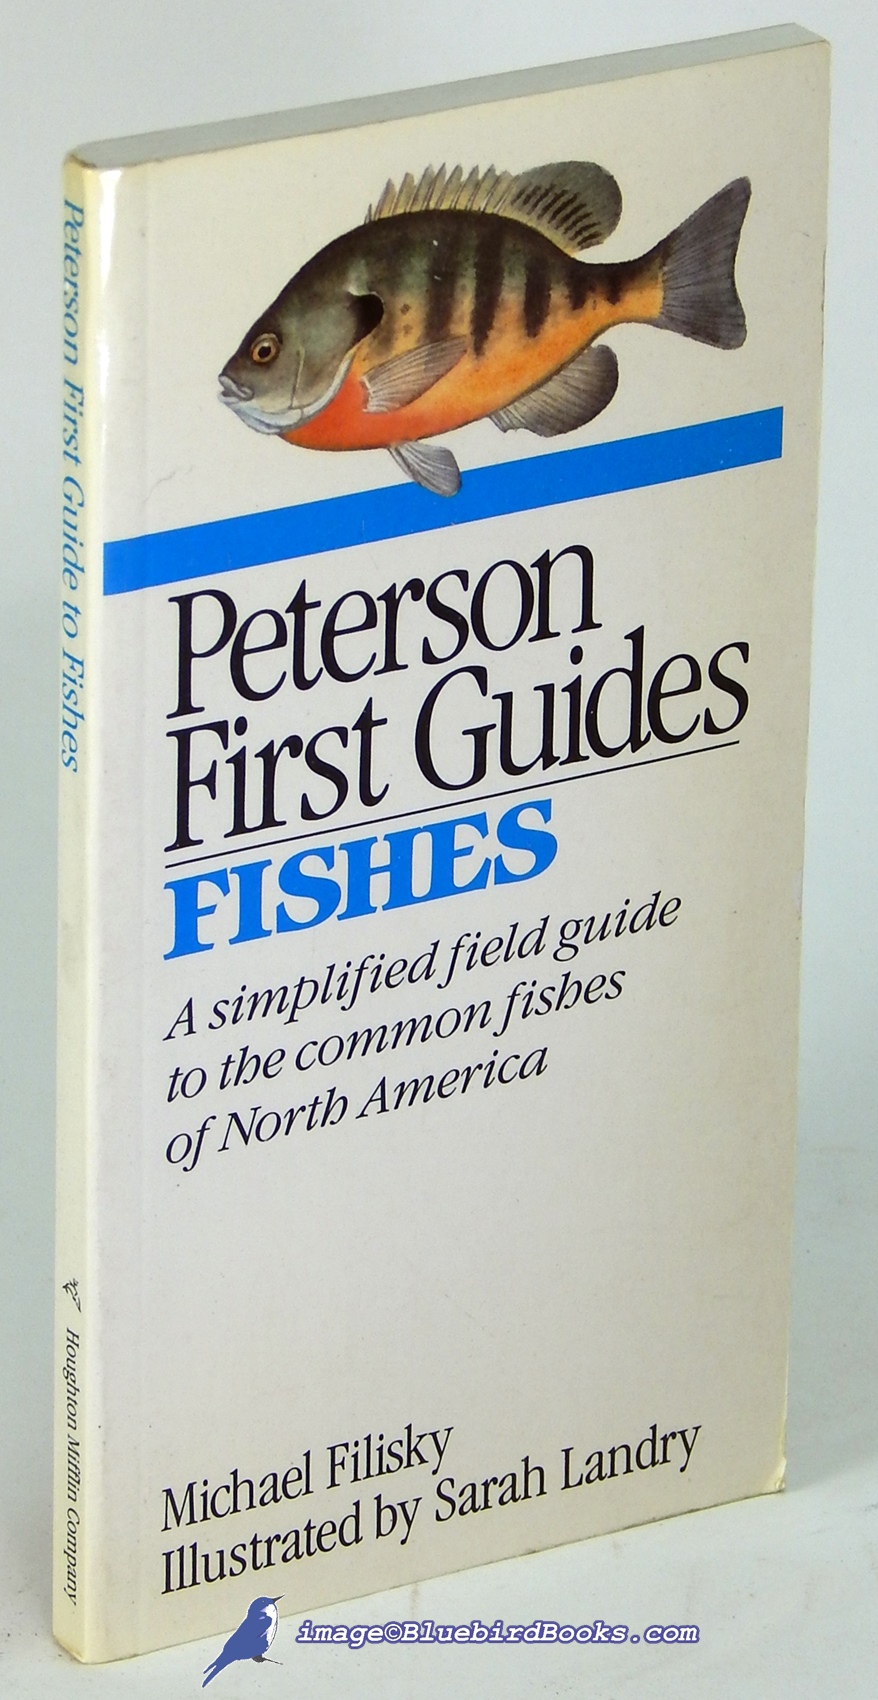 FILISKY, MICHAEL (AUTHOR); LANDRY, SARAH (ILLUSTRATIONS) - Peterson First Guides: Fishes, a Simplified Field Guide to Common Fishes of North America